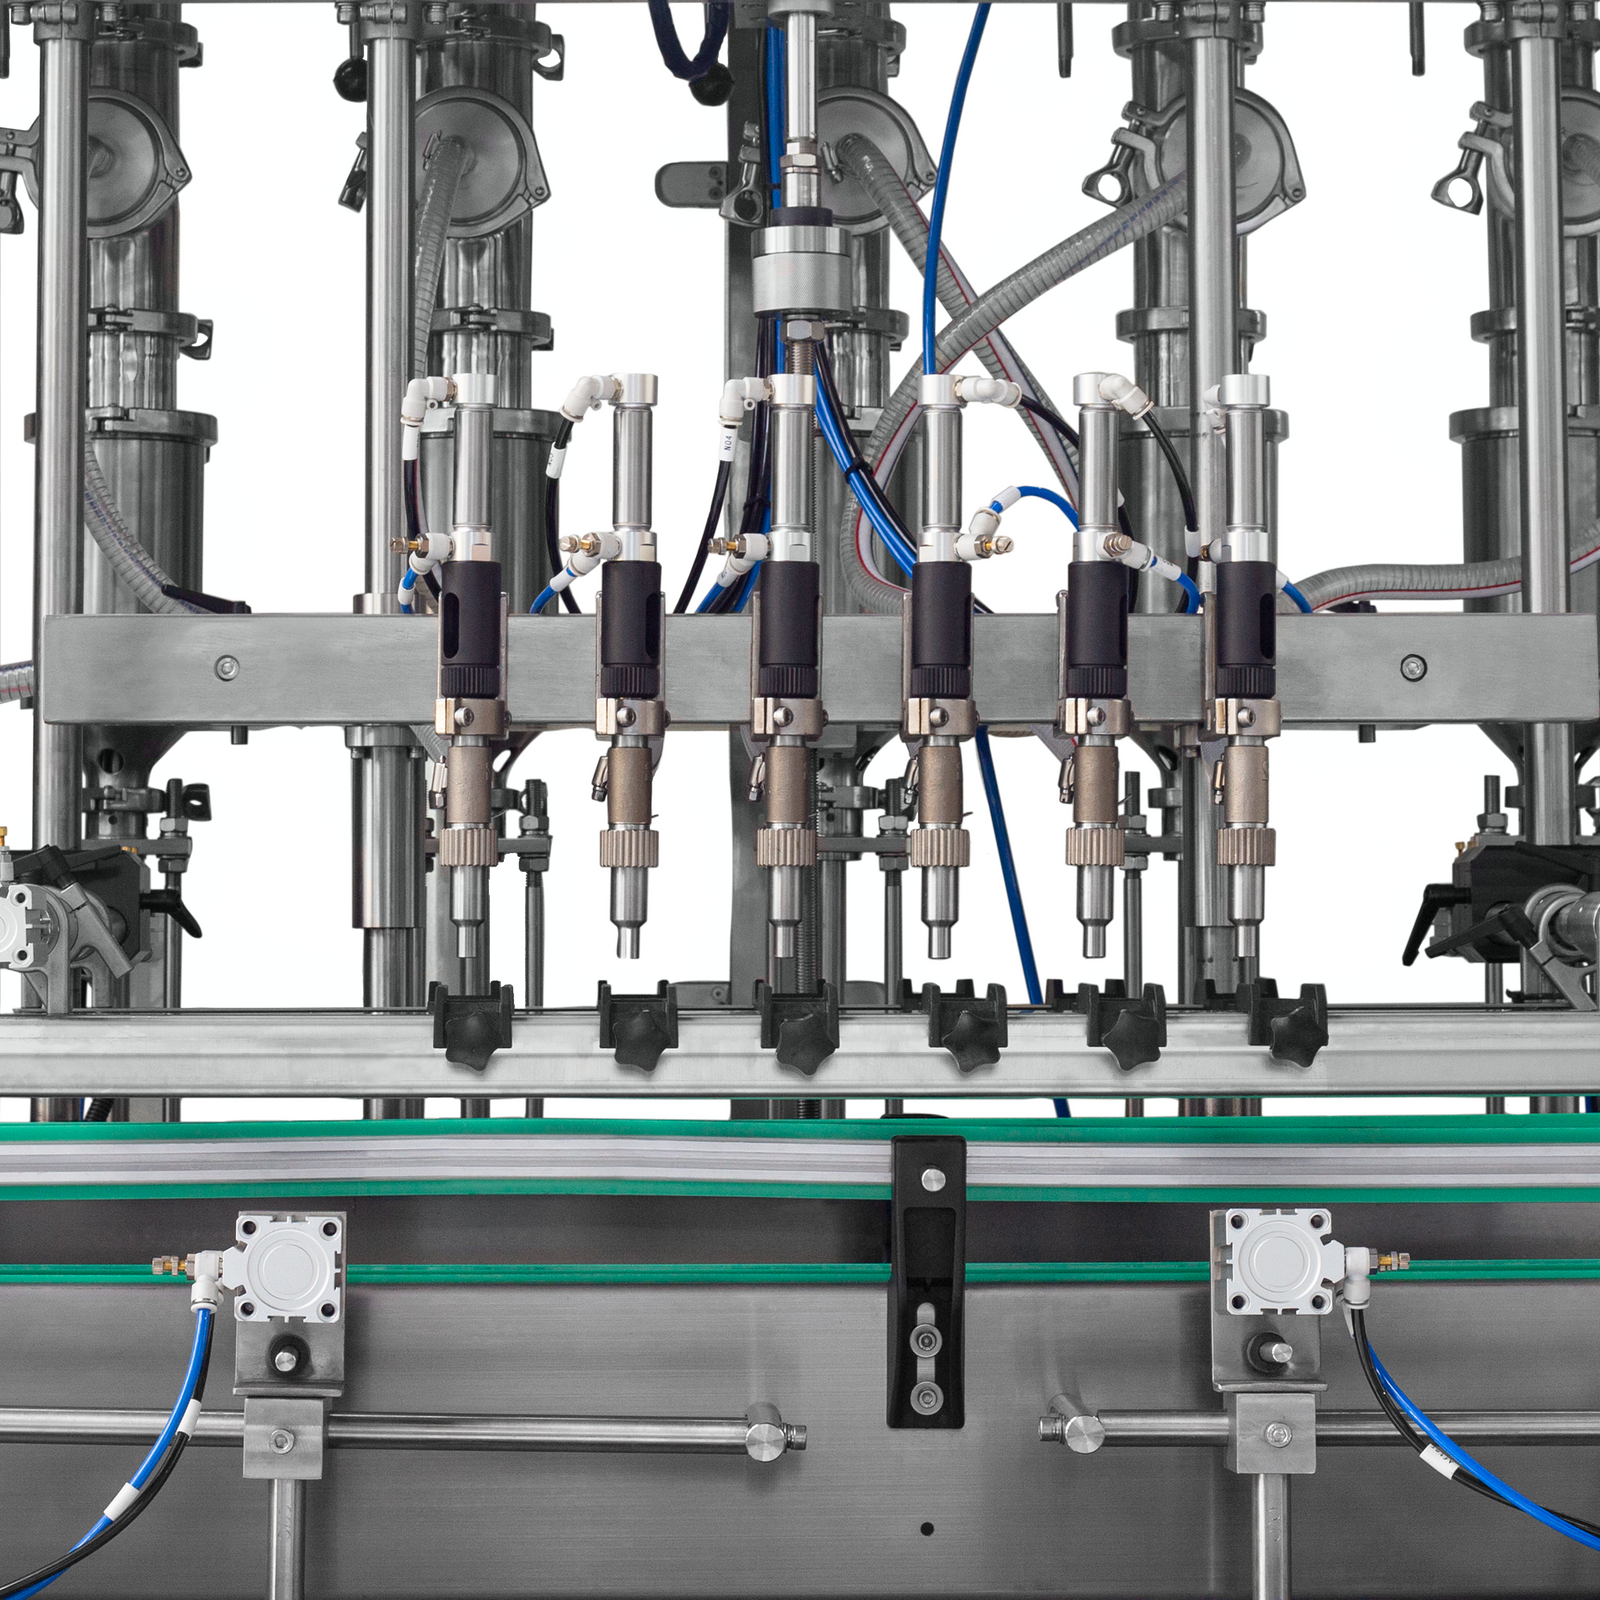 view of the 6 dispensing heads of the JORESTECH piston filling system